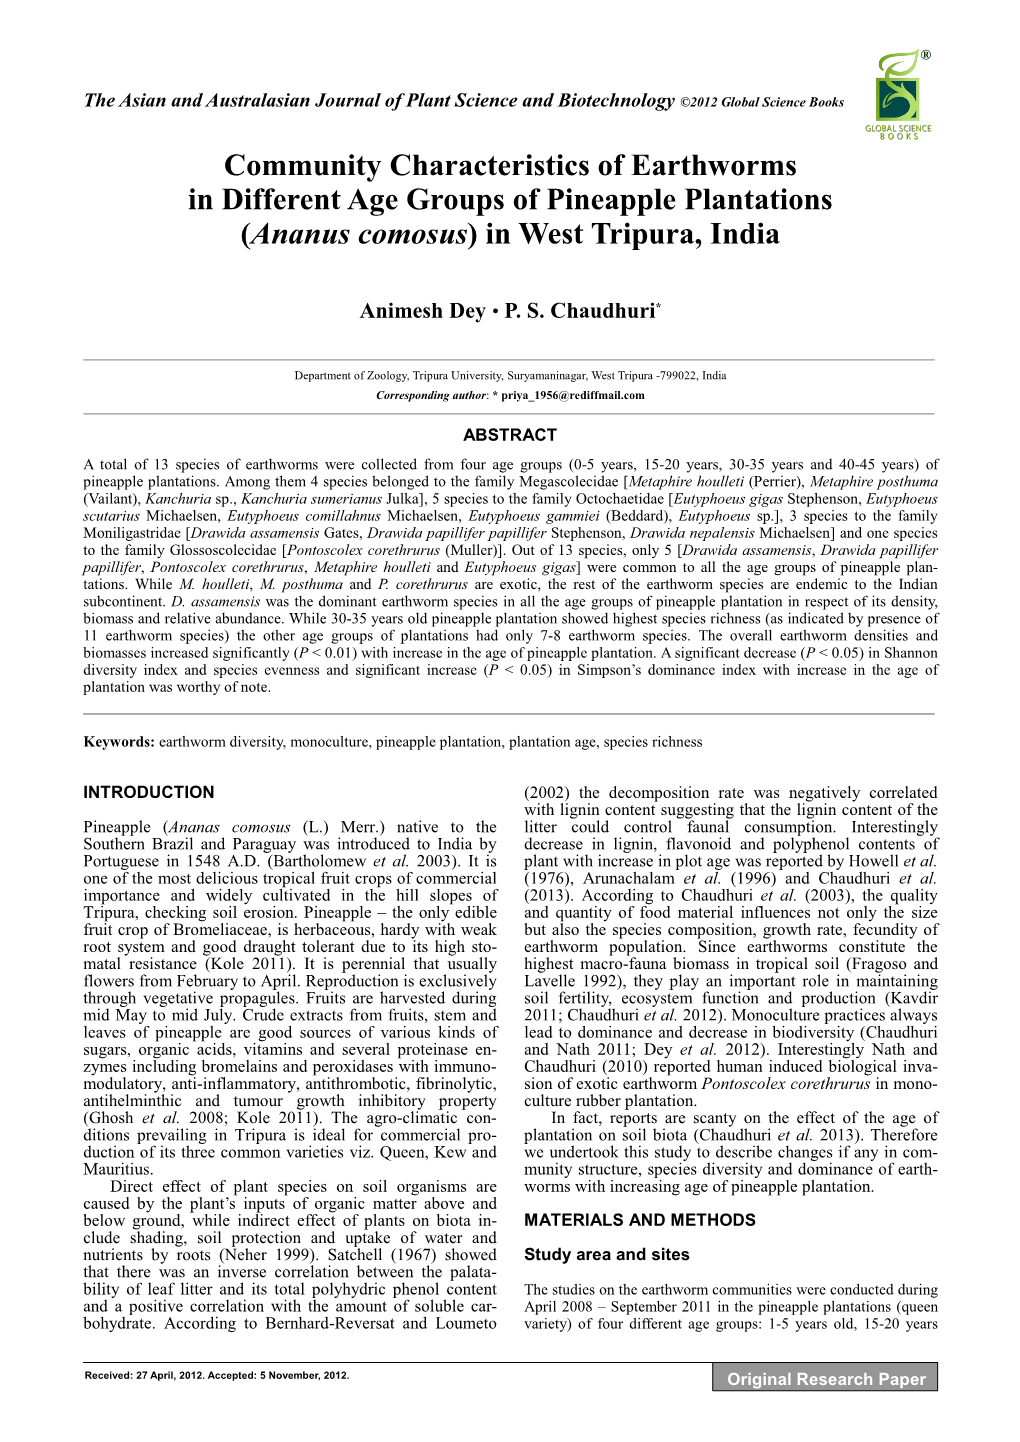 Community Characteristics of Earthworms in Different Age Groups of Pineapple Plantations (Ananus Comosus) in West Tripura, India